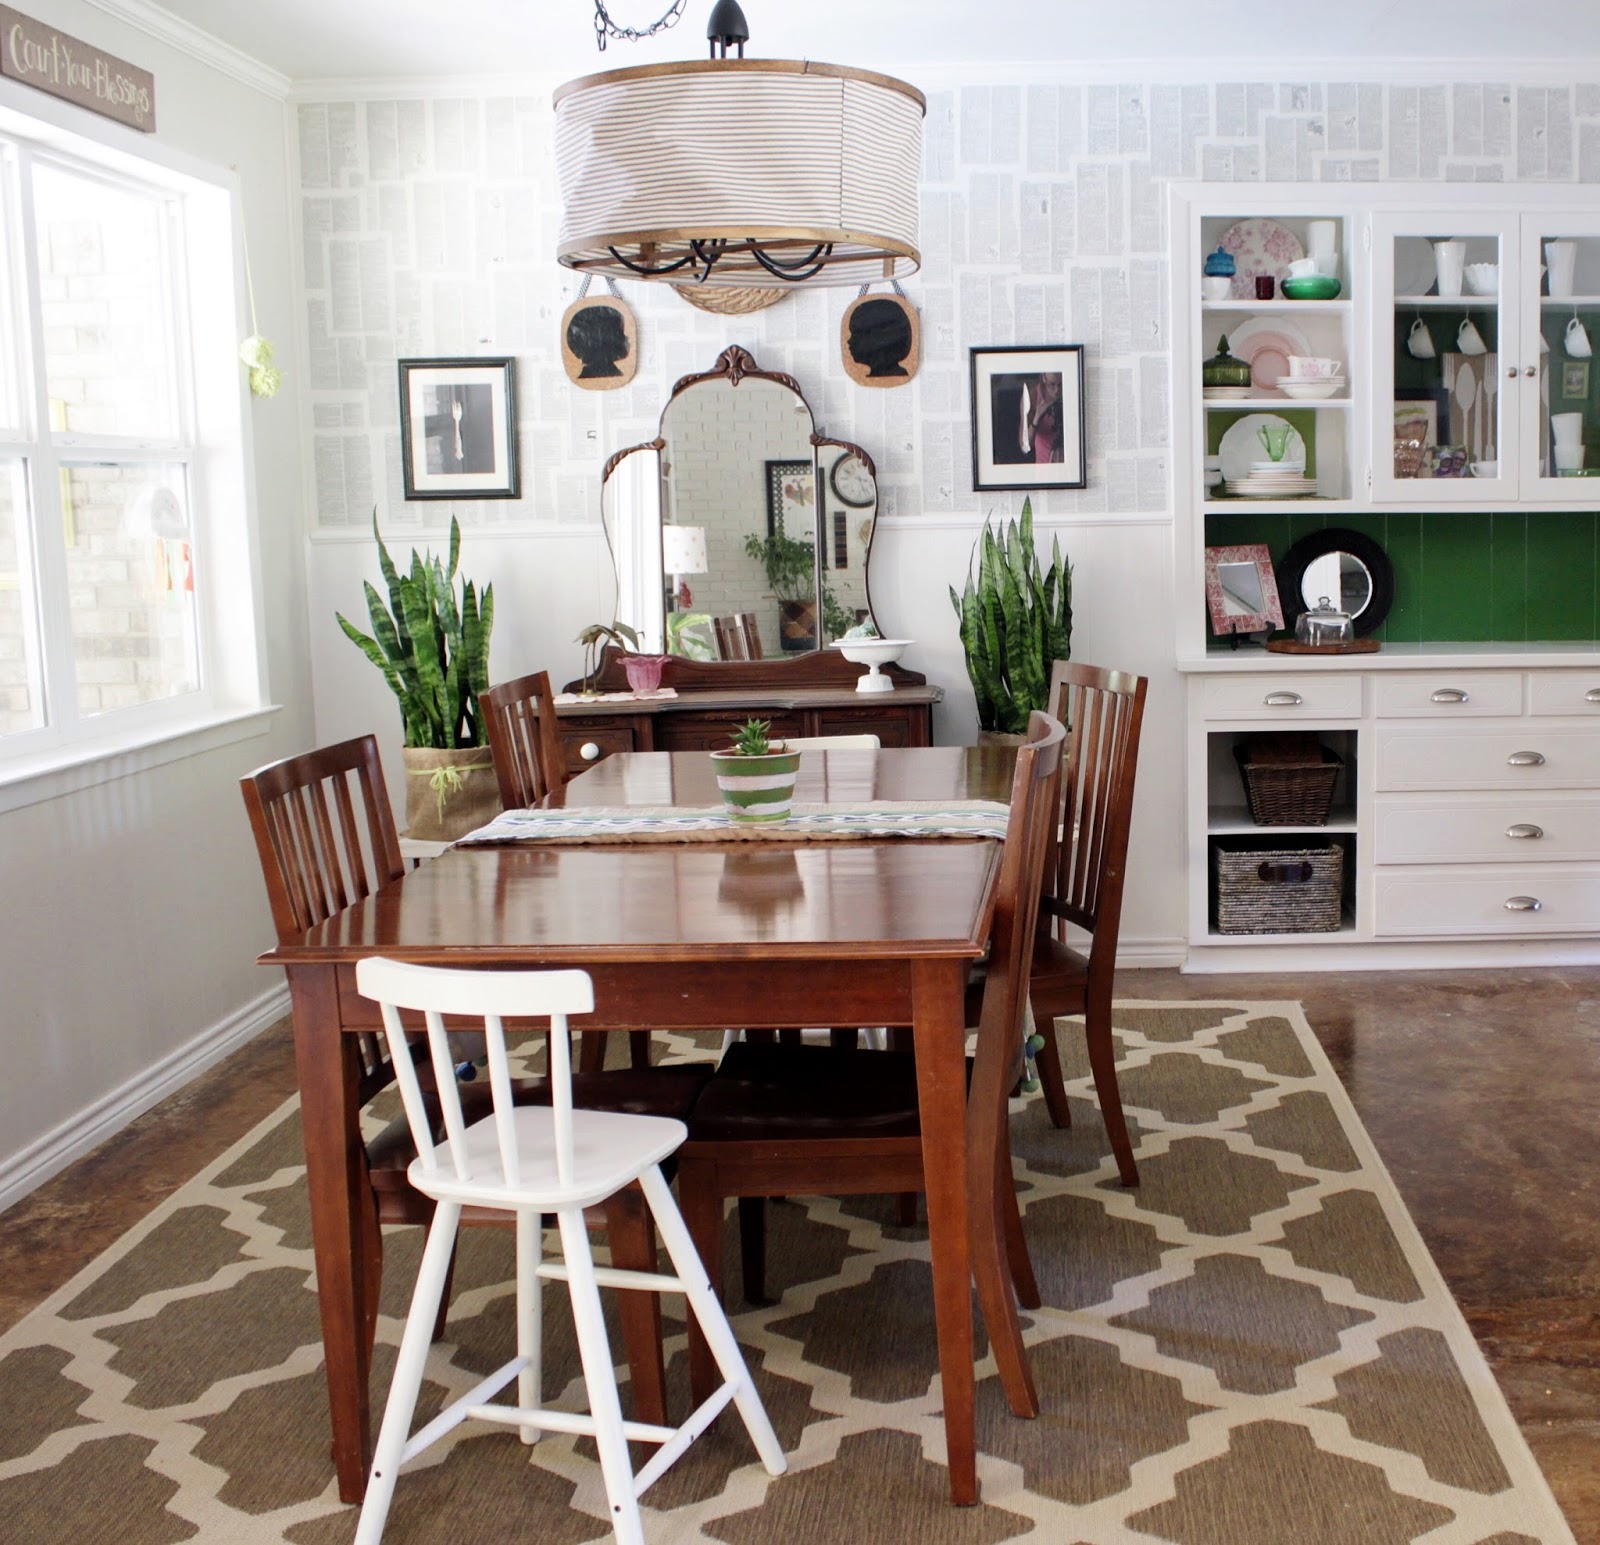 House Homemade: How to Refinish a Dining Table